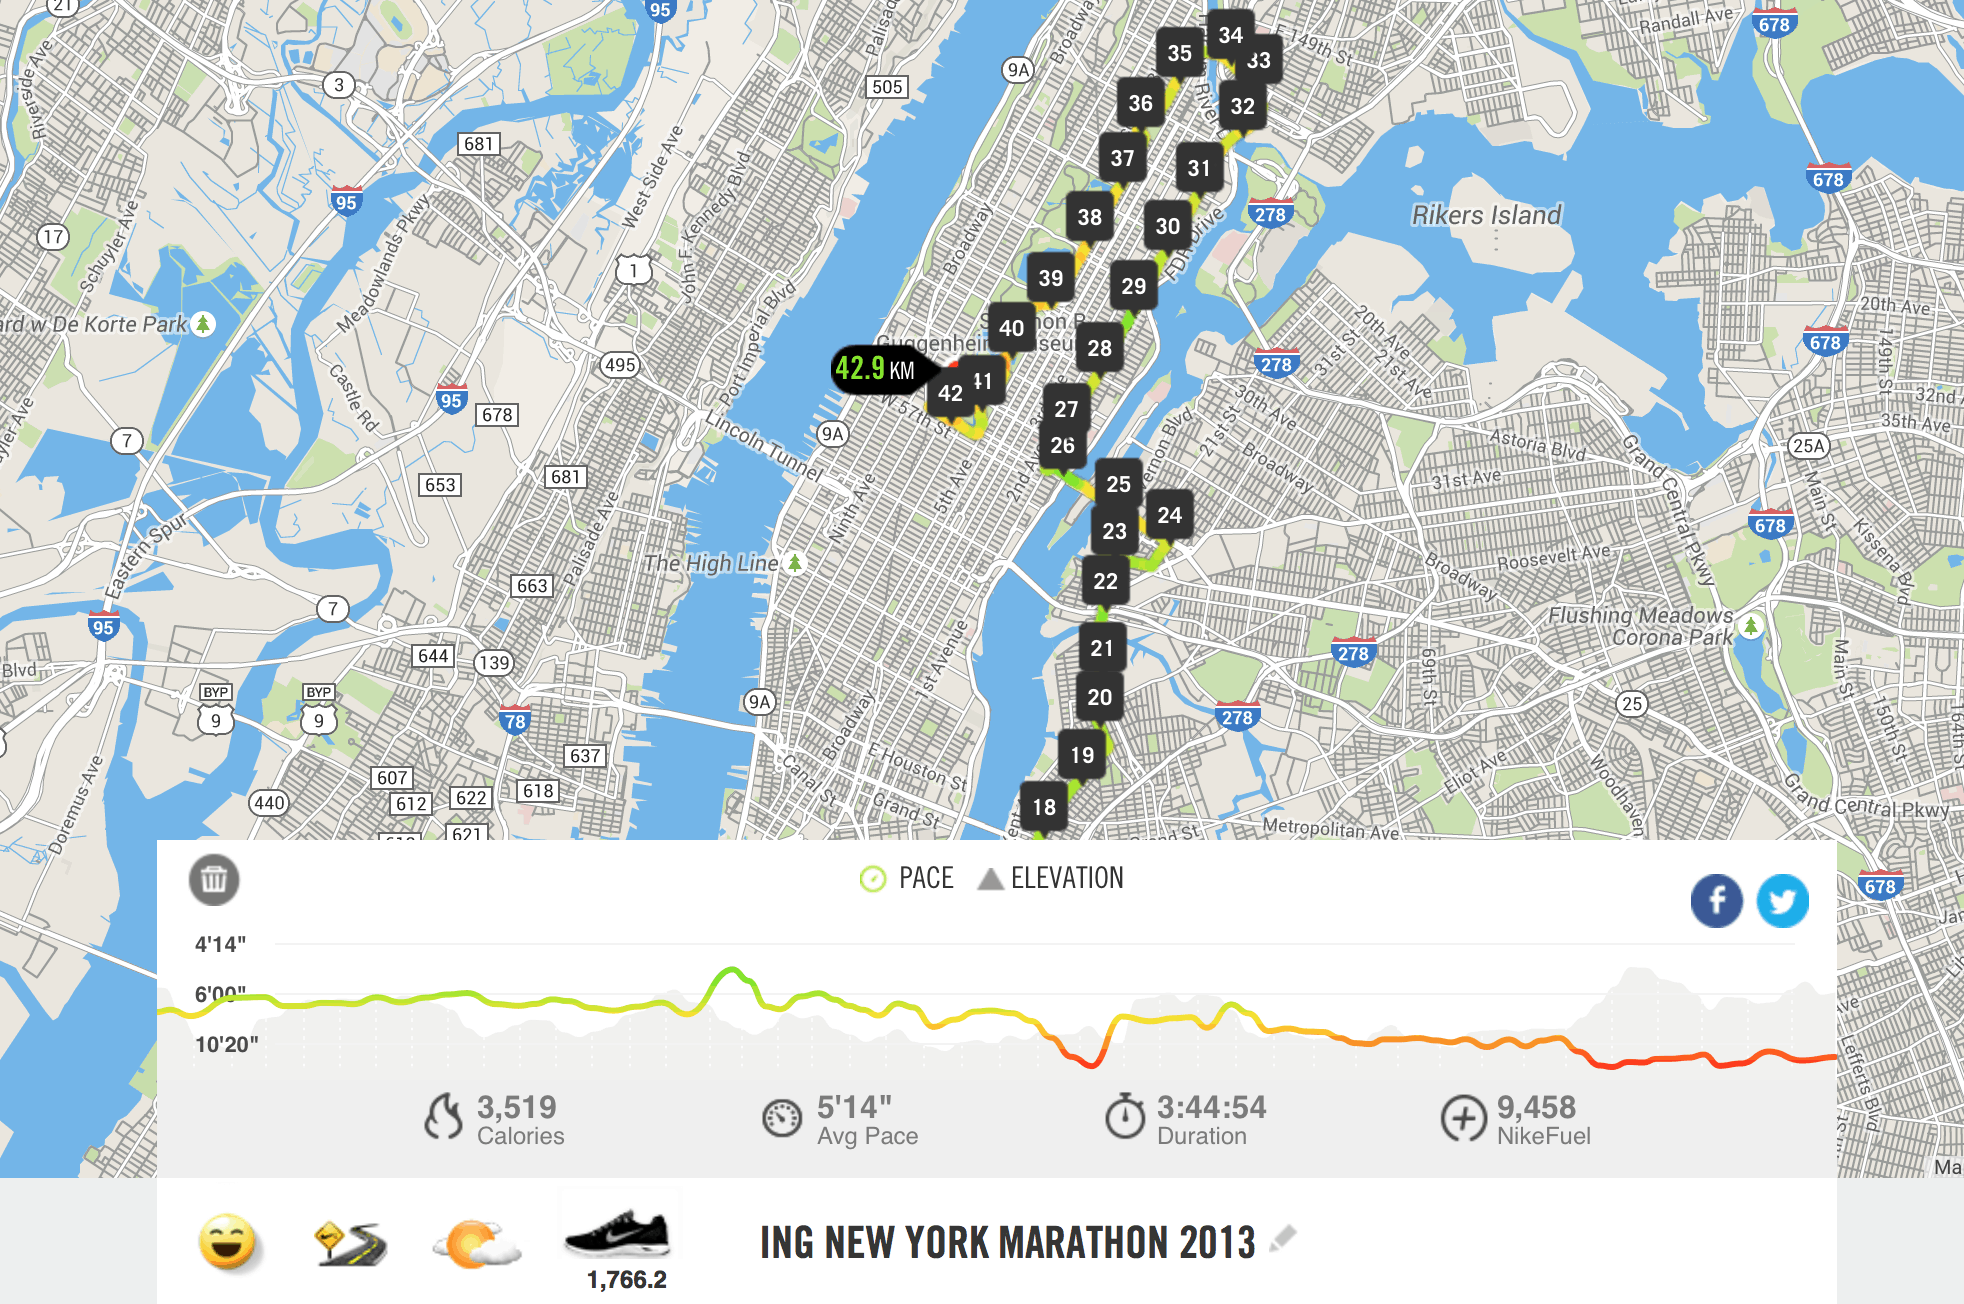 Use 3rd party apps like Nike+ to monitor your split times